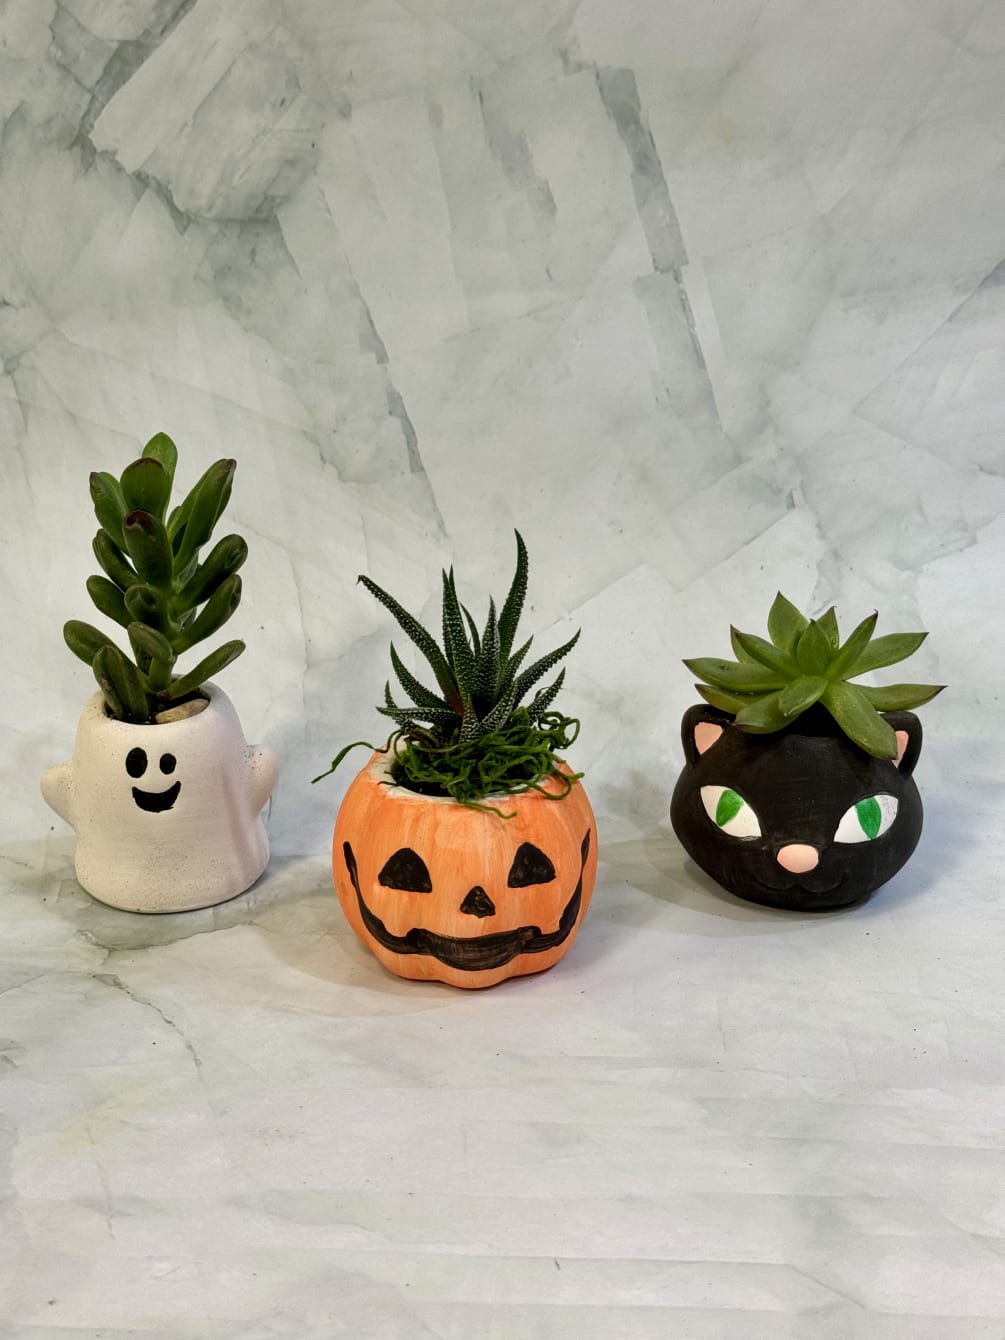 These adorable planters are spooky, yet cute! Inside the planter sits a